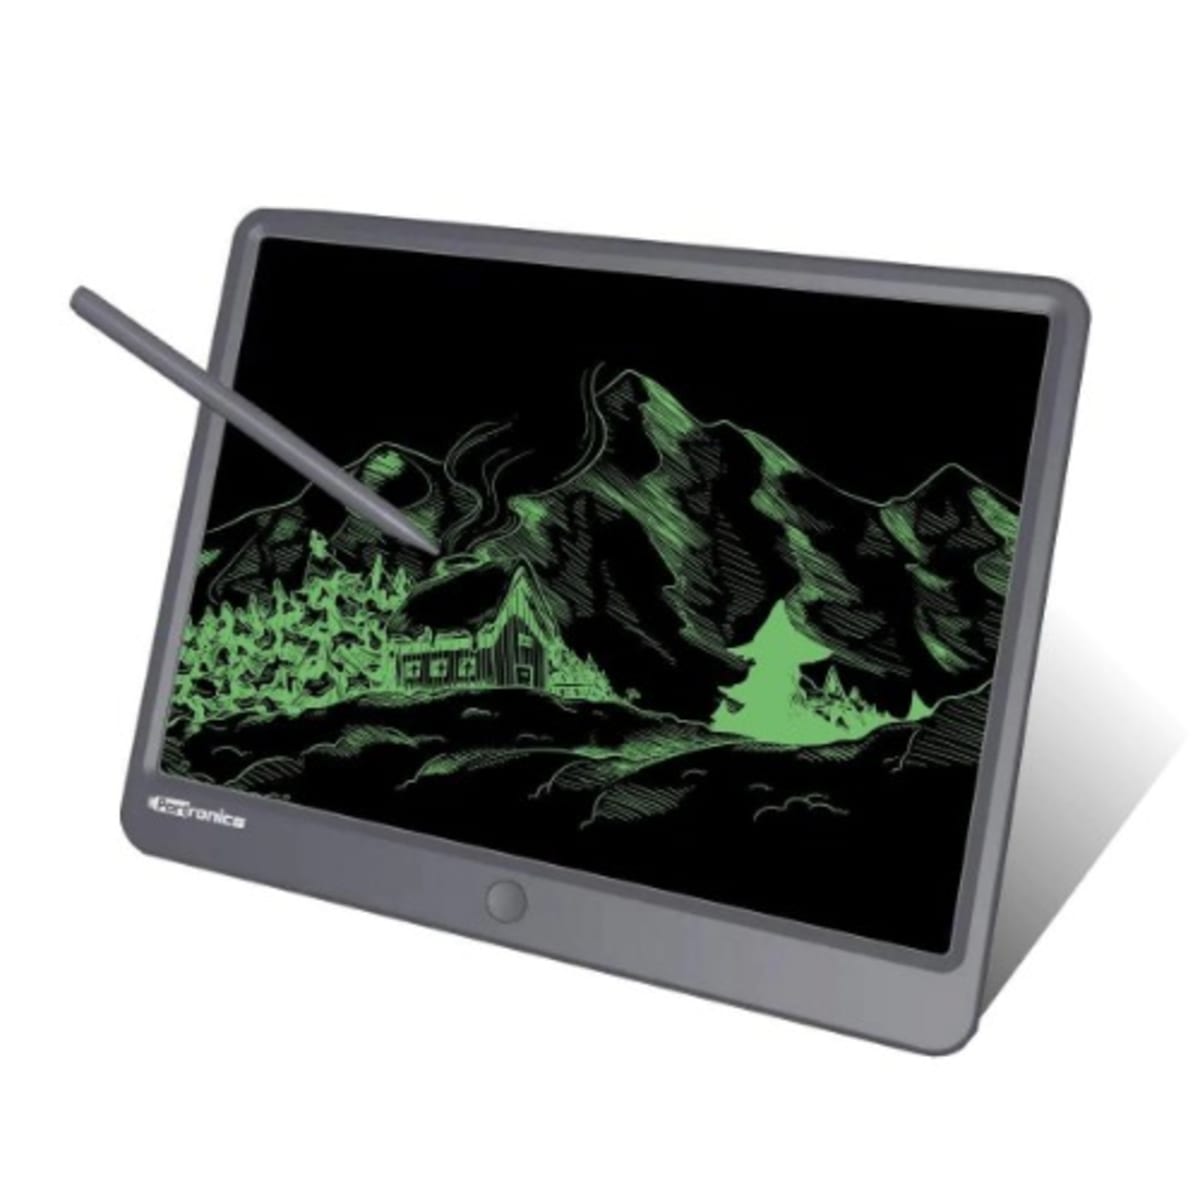 Lcd Writing Tablet Electronic Digital Drawing Pad For kids - 12 Inch